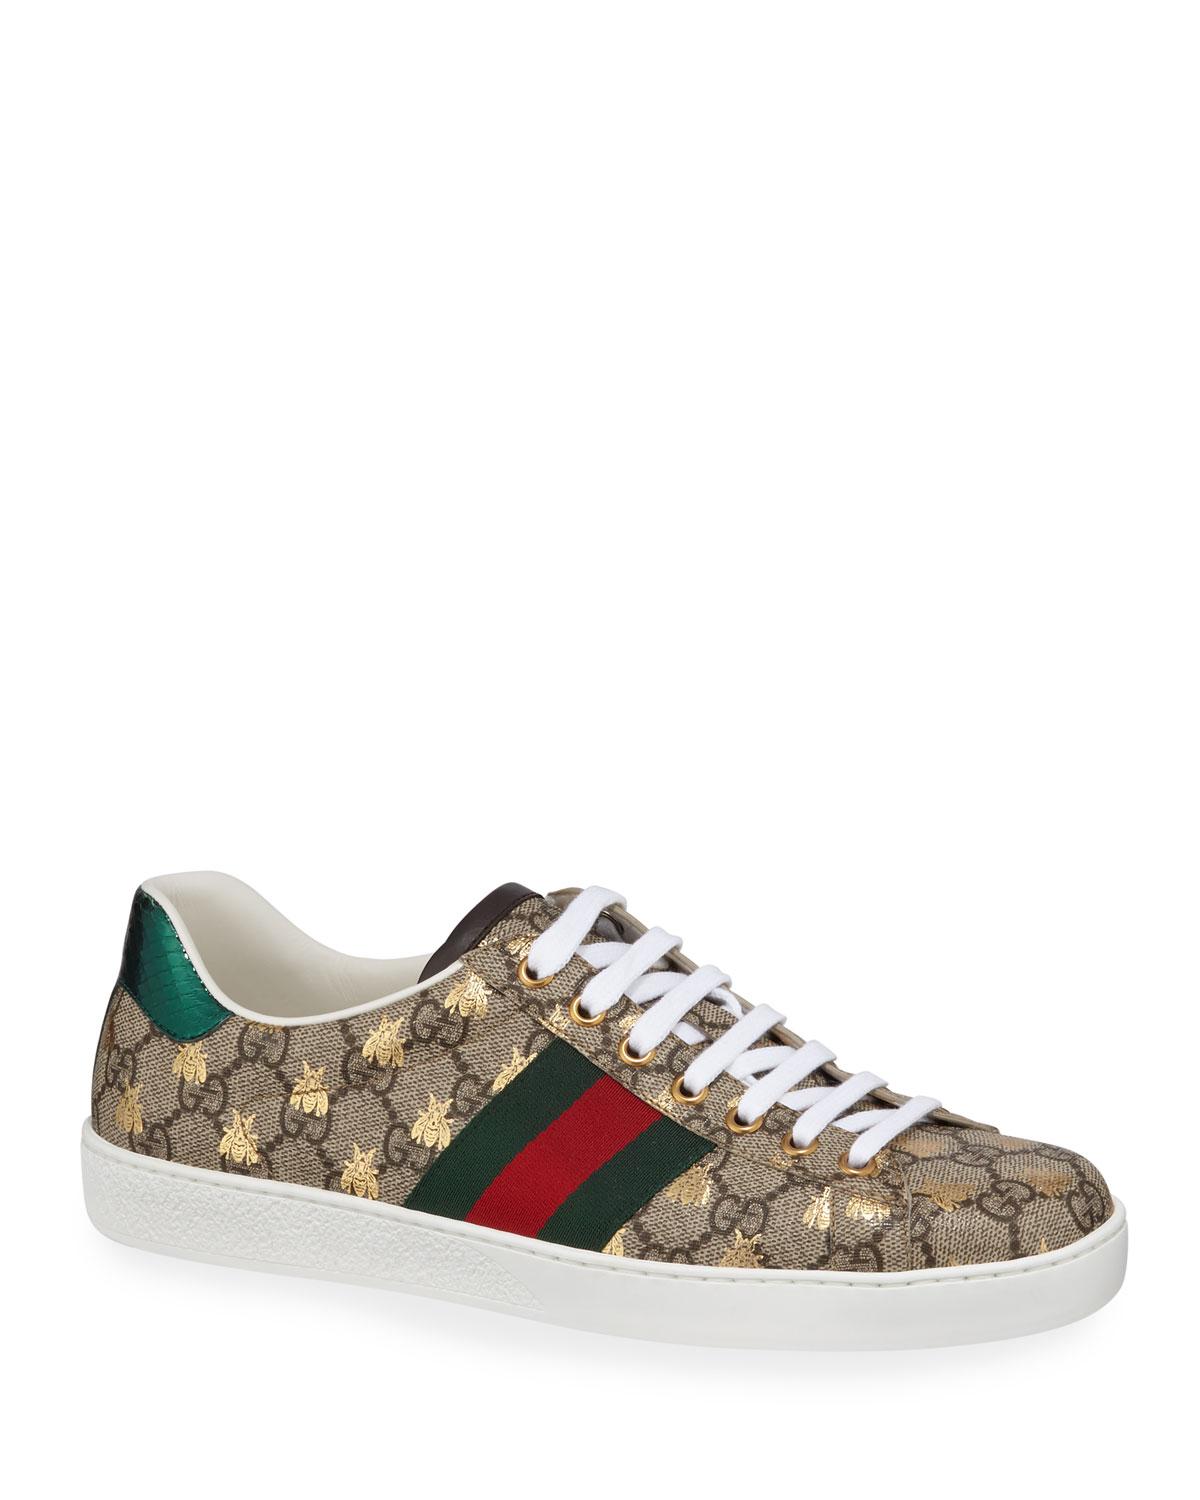 Gucci Men&#39;s Ace GG Supreme Bee Sneakers for Men - Lyst